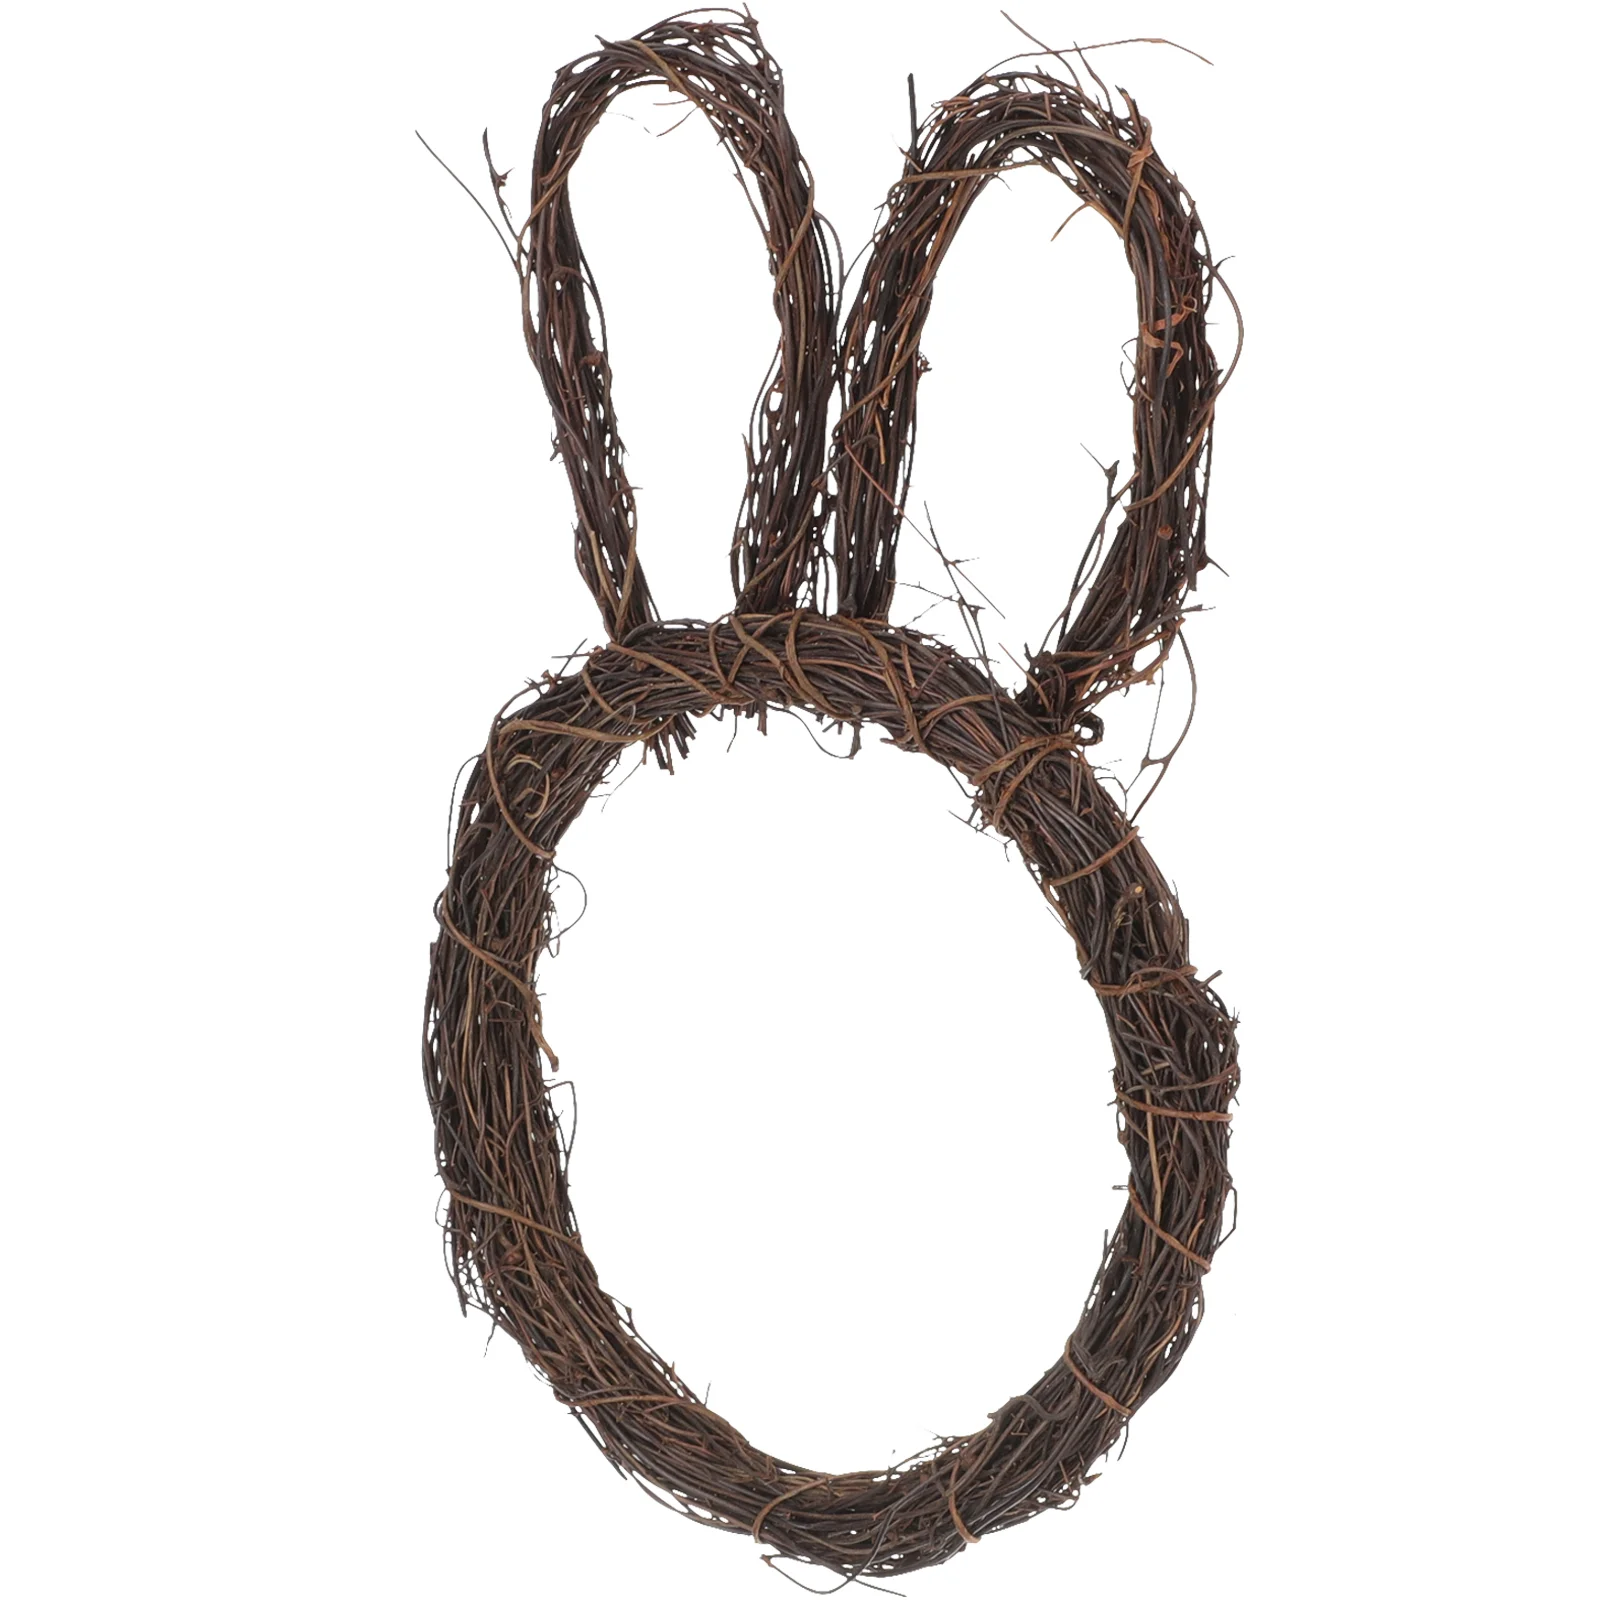 

Wreath Easter Rattan Bunny Garland Diy Frame Ring Rabbit Grapevine Door Wreaths Rings Front Floral Hoop Woven Hanging Crafts